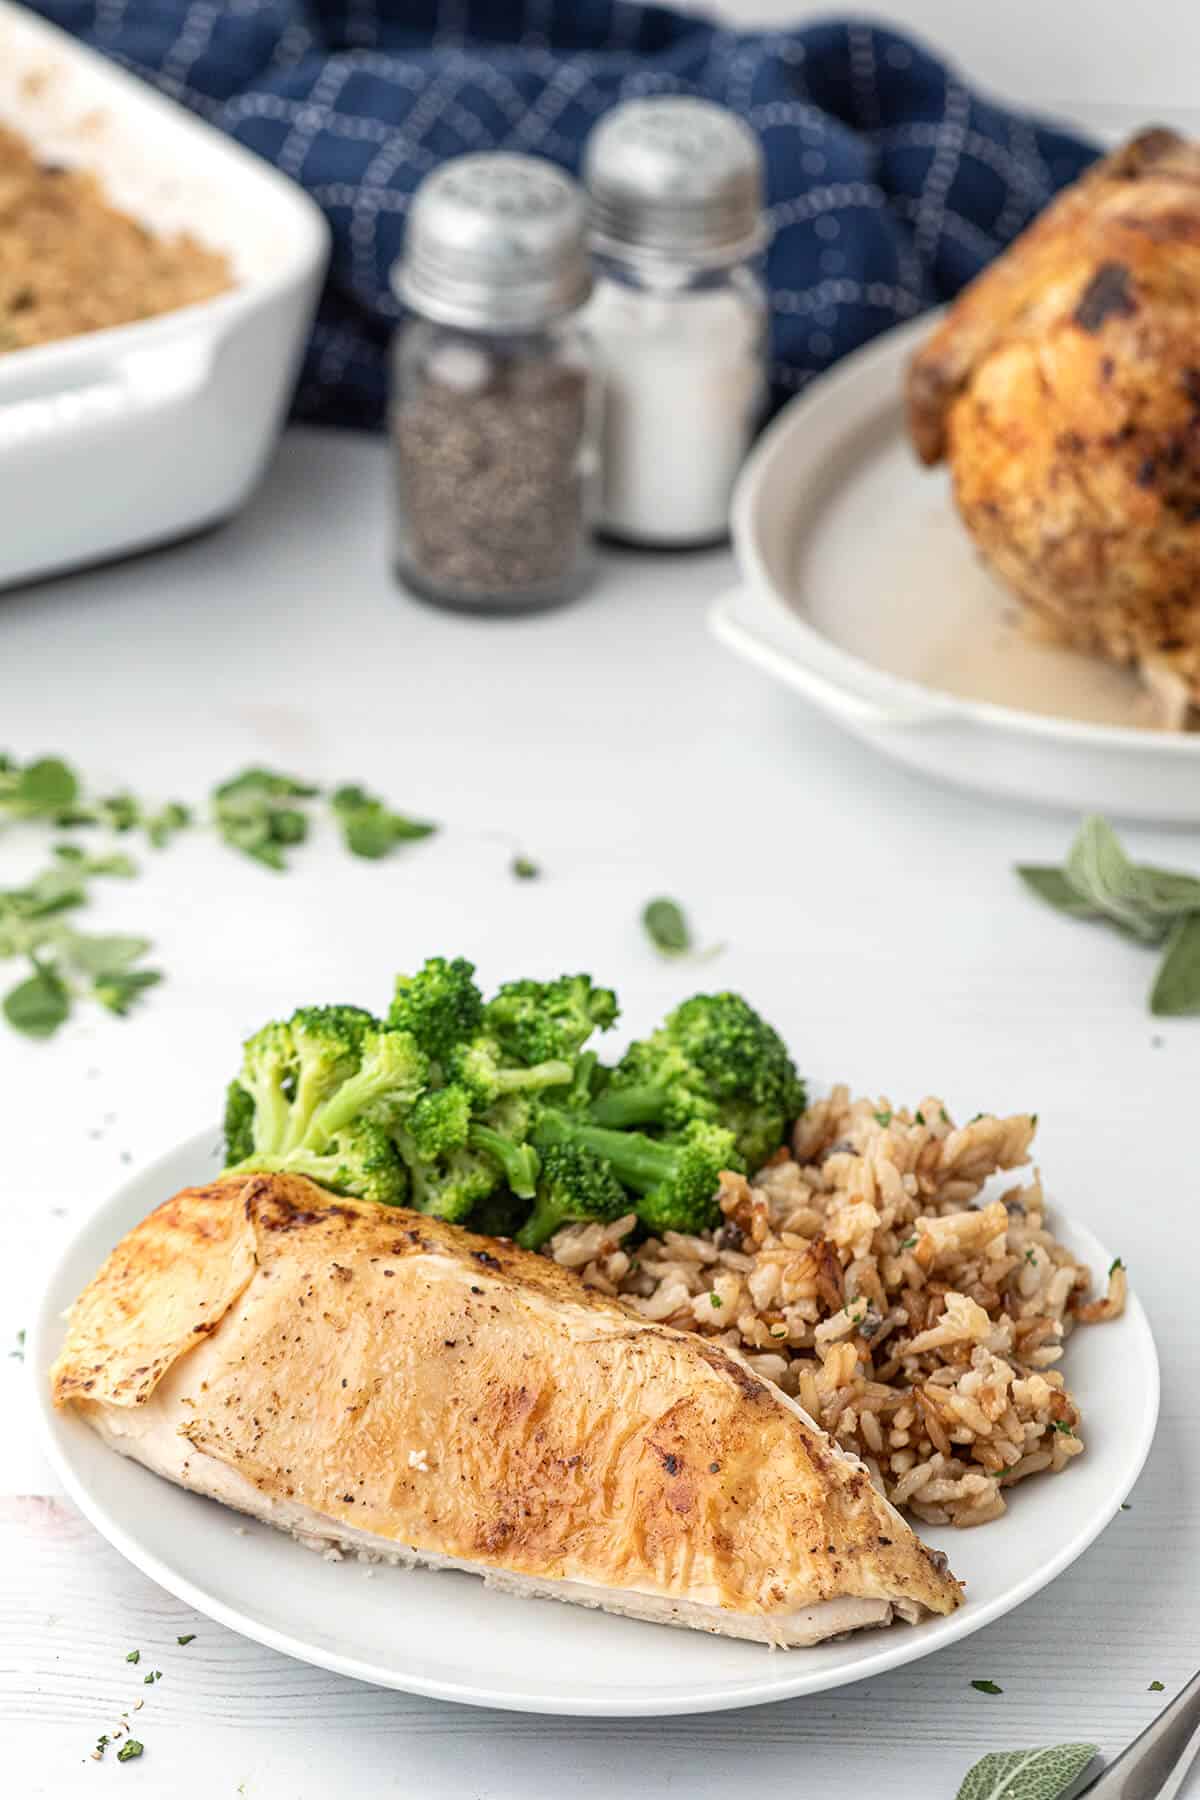 A slice of chicken breast with rice and broccoli on a plate.